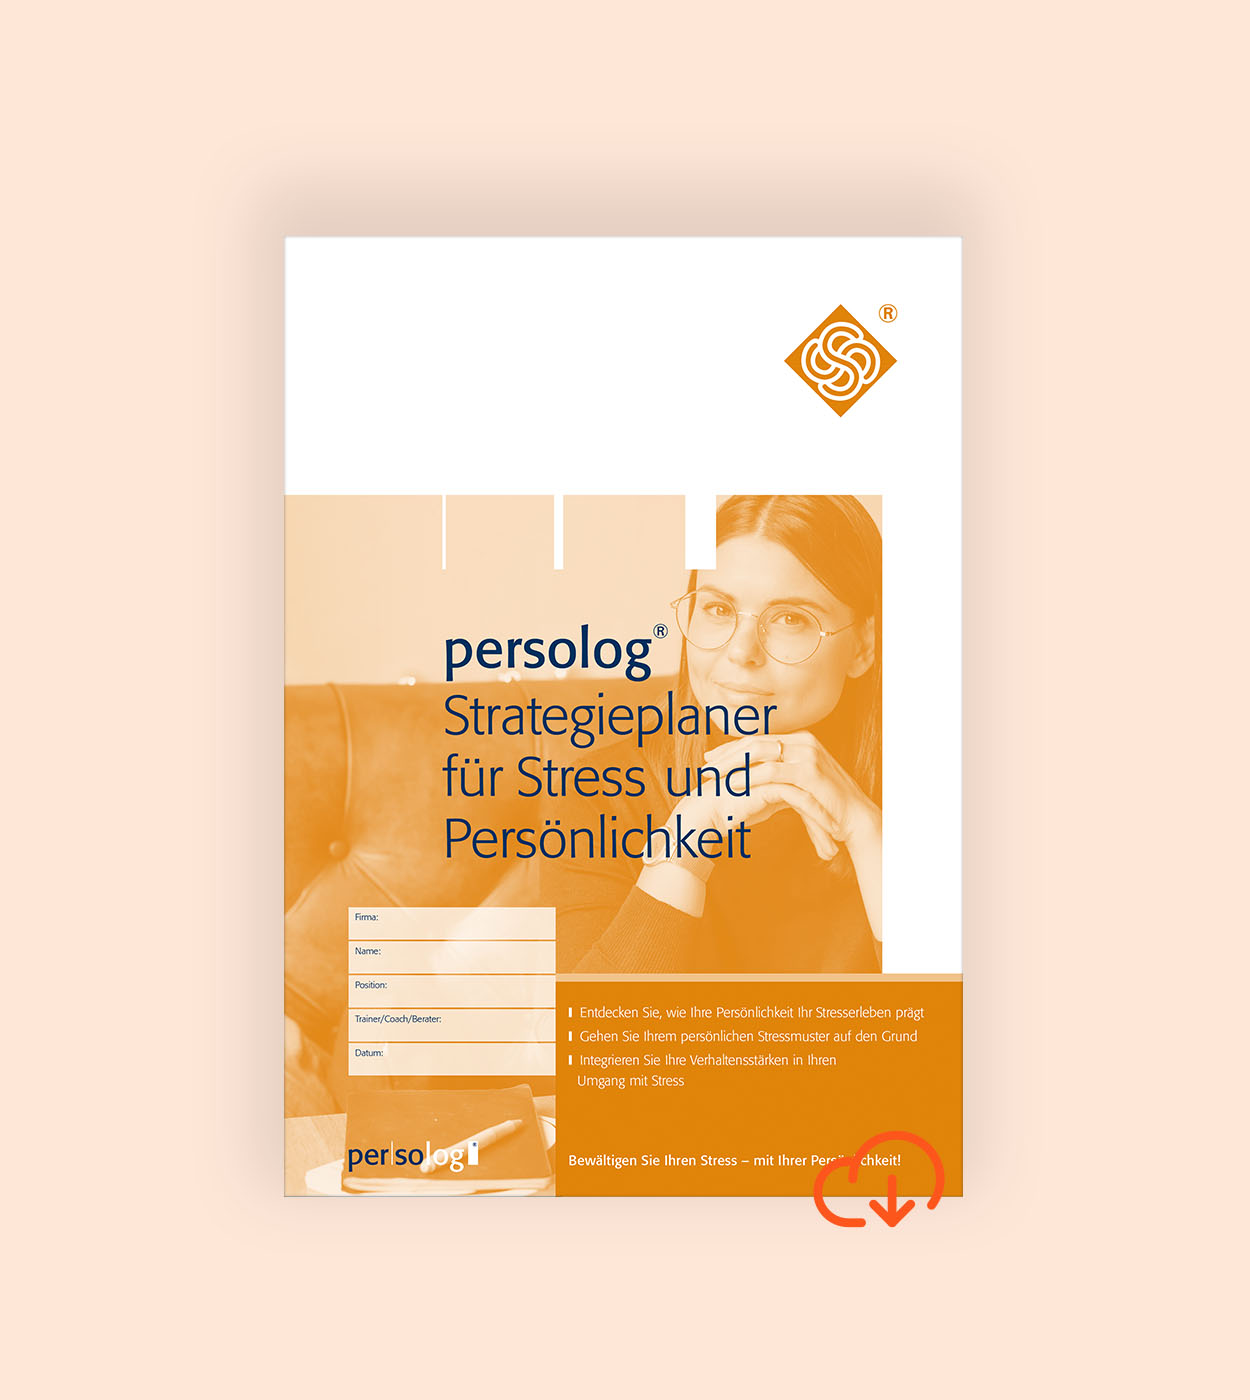 persolog® Strategy Planner for Stress and Personality Online